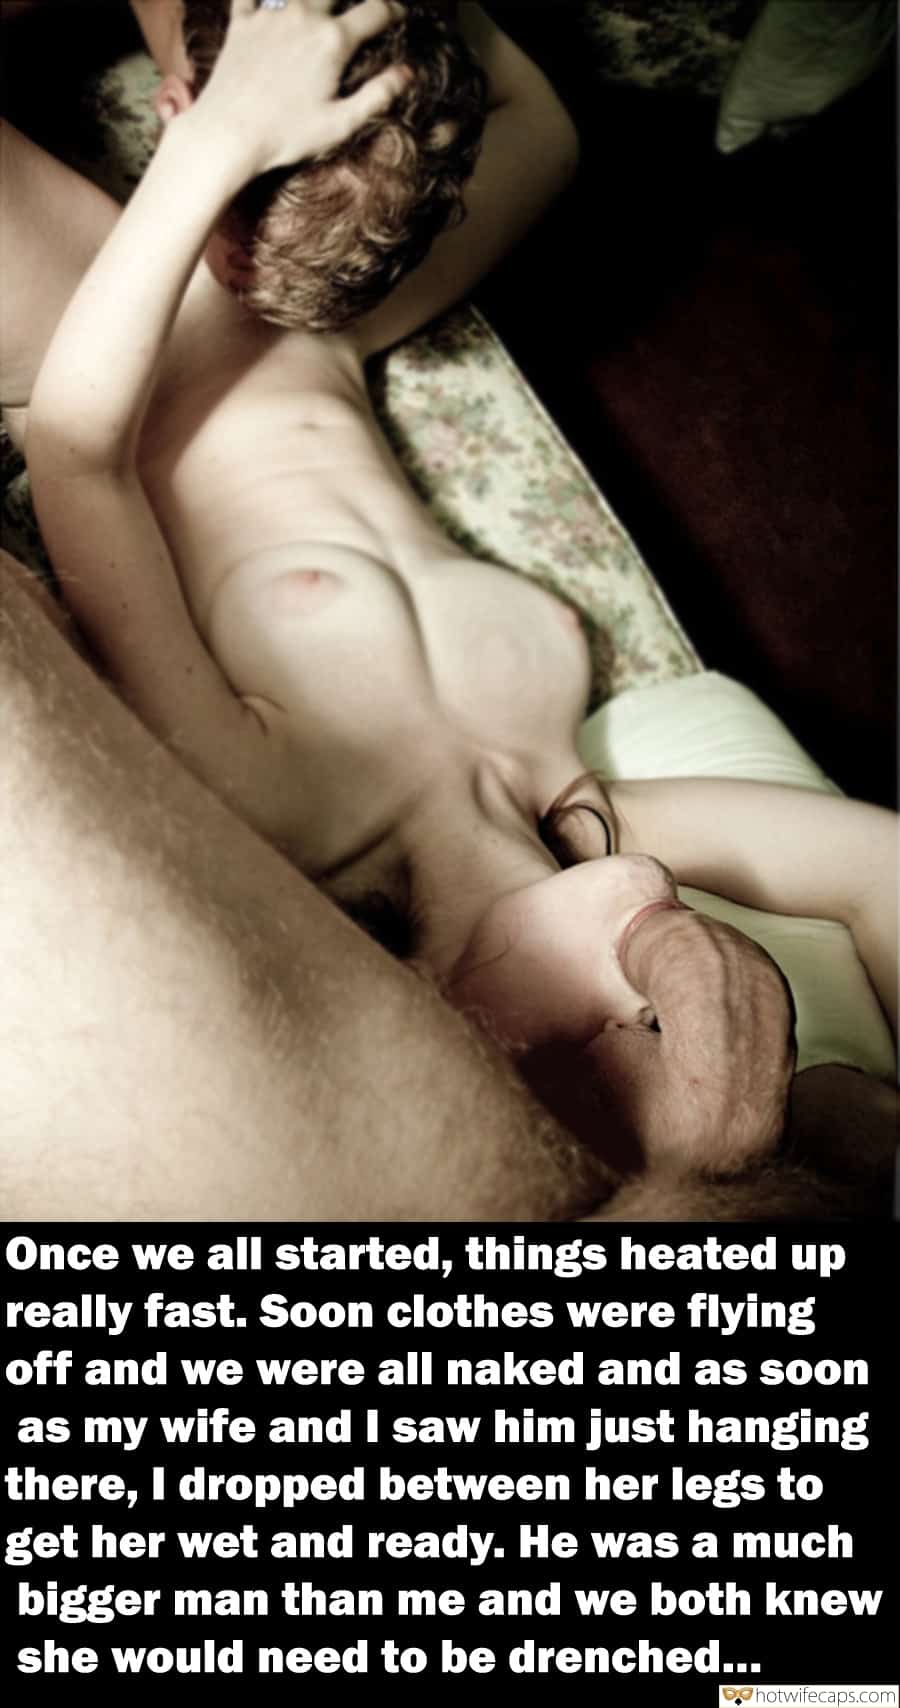 Wife Sharing Threesome Bigger Cock hotwife caption: Once we all started, things heated up really fast. Soon clothes were flying off and we were all naked and as soon as my wife and I saw him just hanging there, I dropped between her legs to get her...